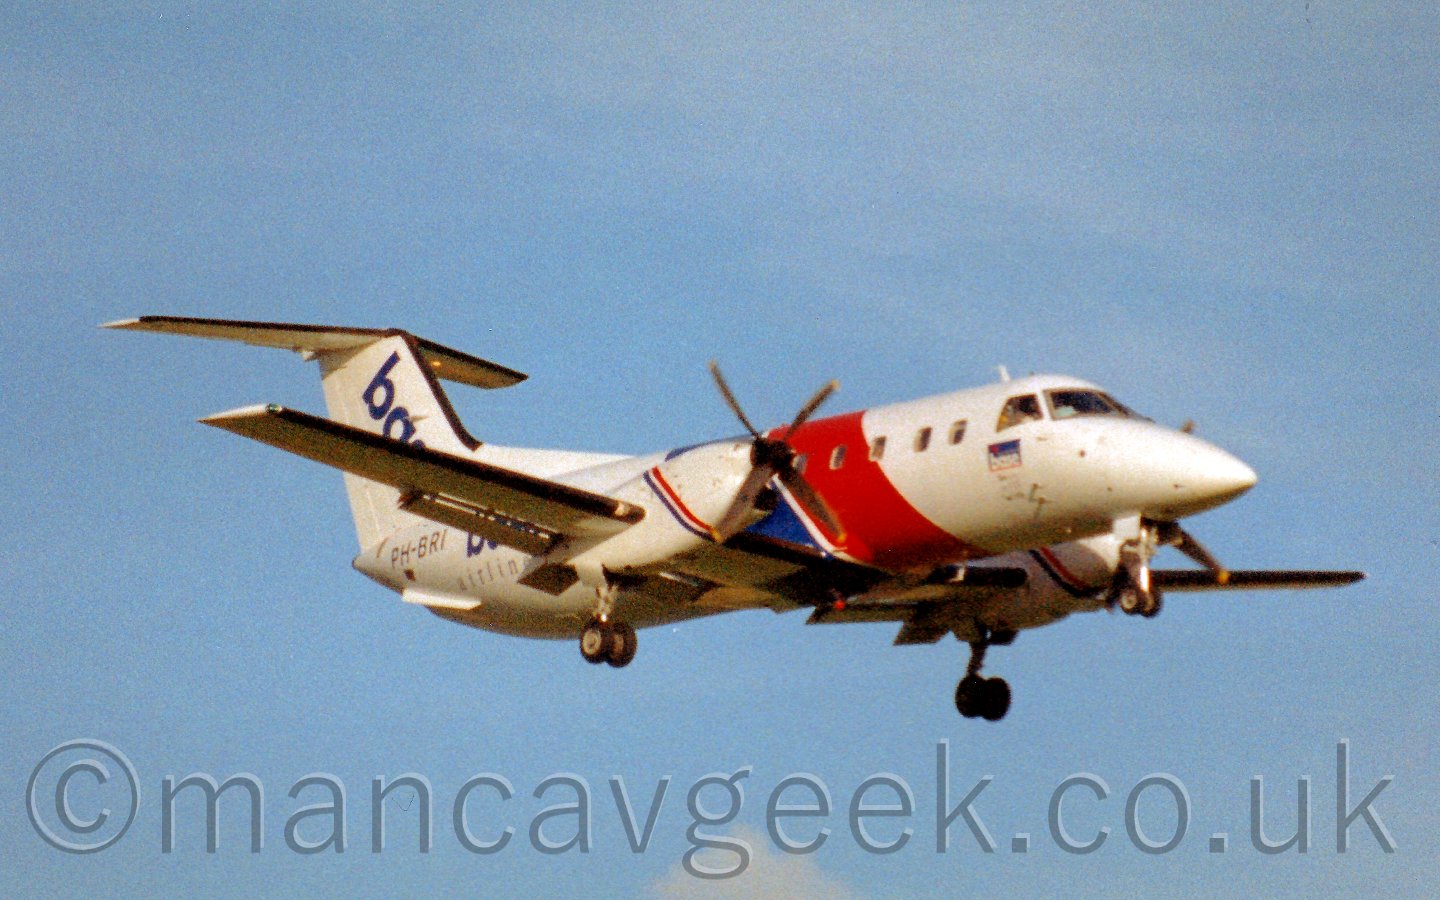 Side view of a white, twin propellor engined alirliner flying from left to right at a low altitude, with wheels extended and flaps deployed from the rear of the wings, obviously about to land at an airport.